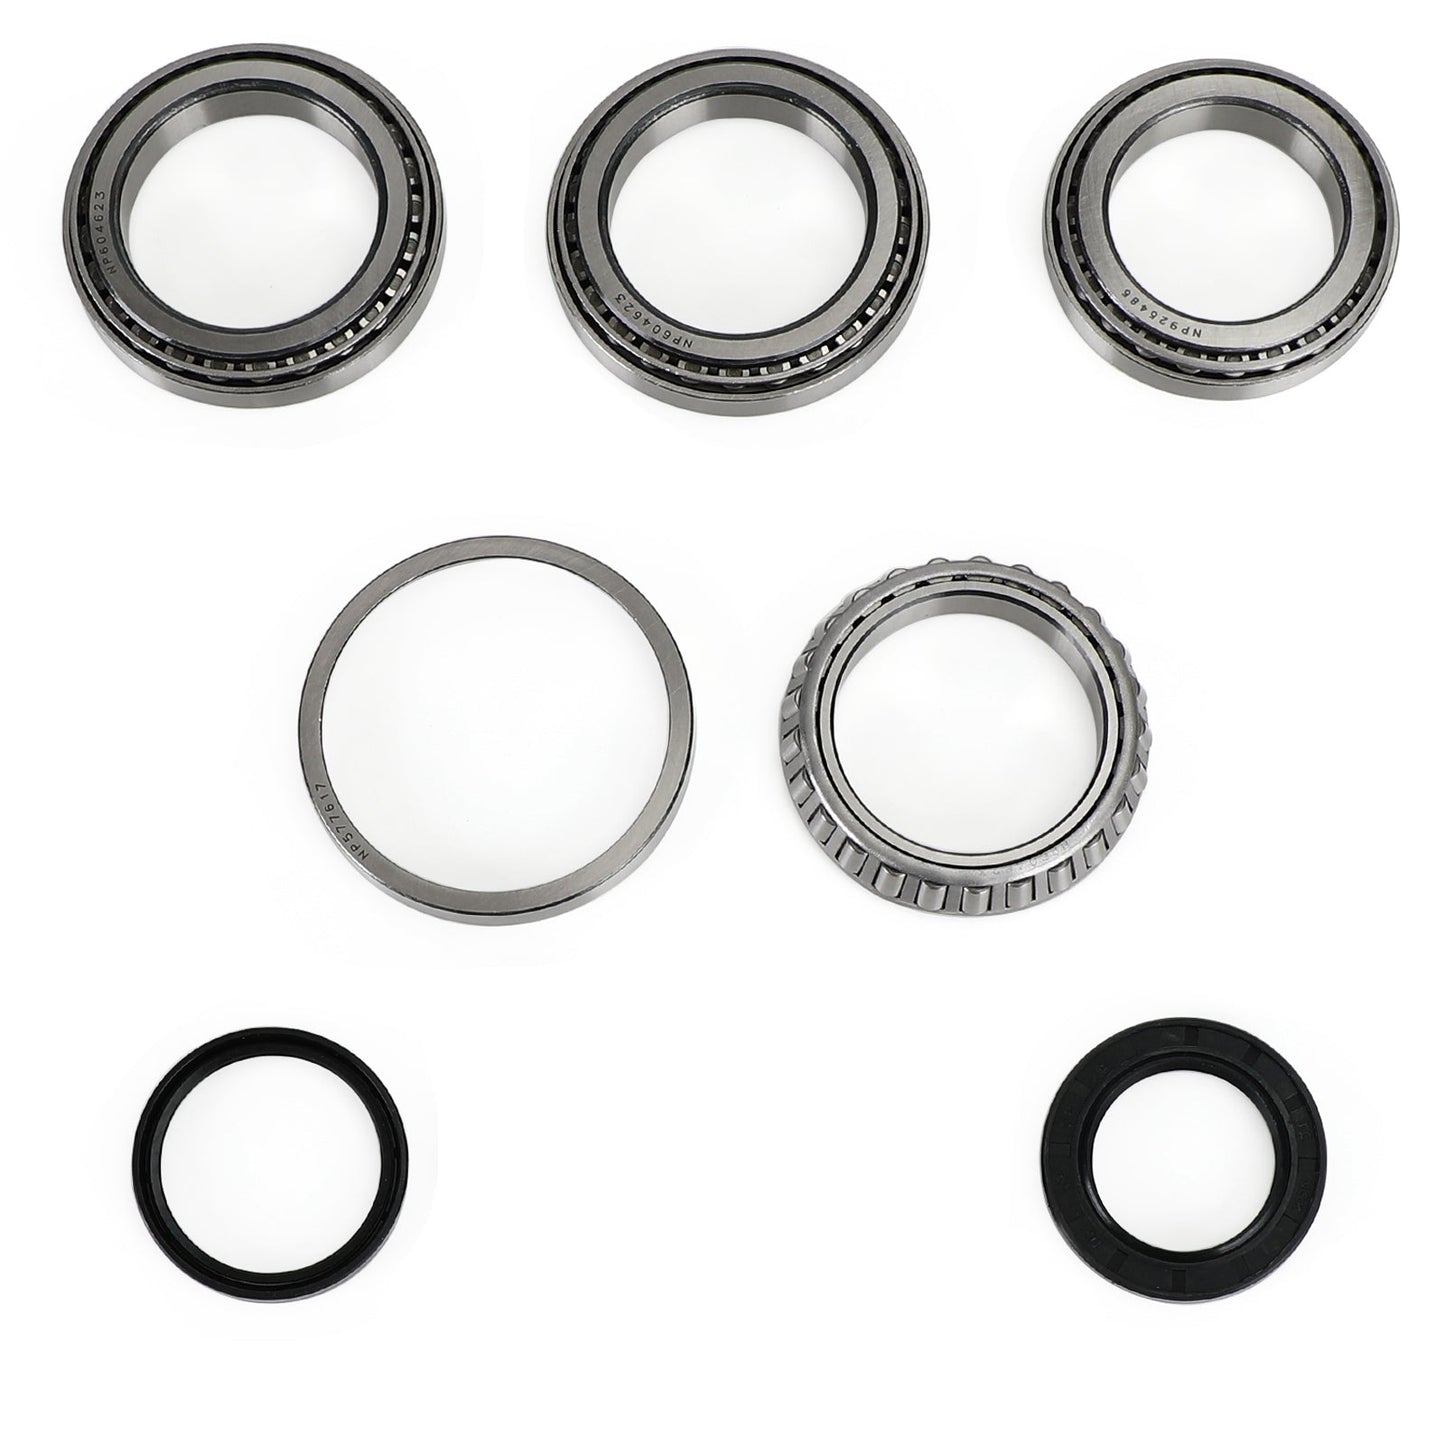 7G-Tronic 722.9 4-Matic Transfer Case Rebuild Bearings & Seals For Mercedes-Benz